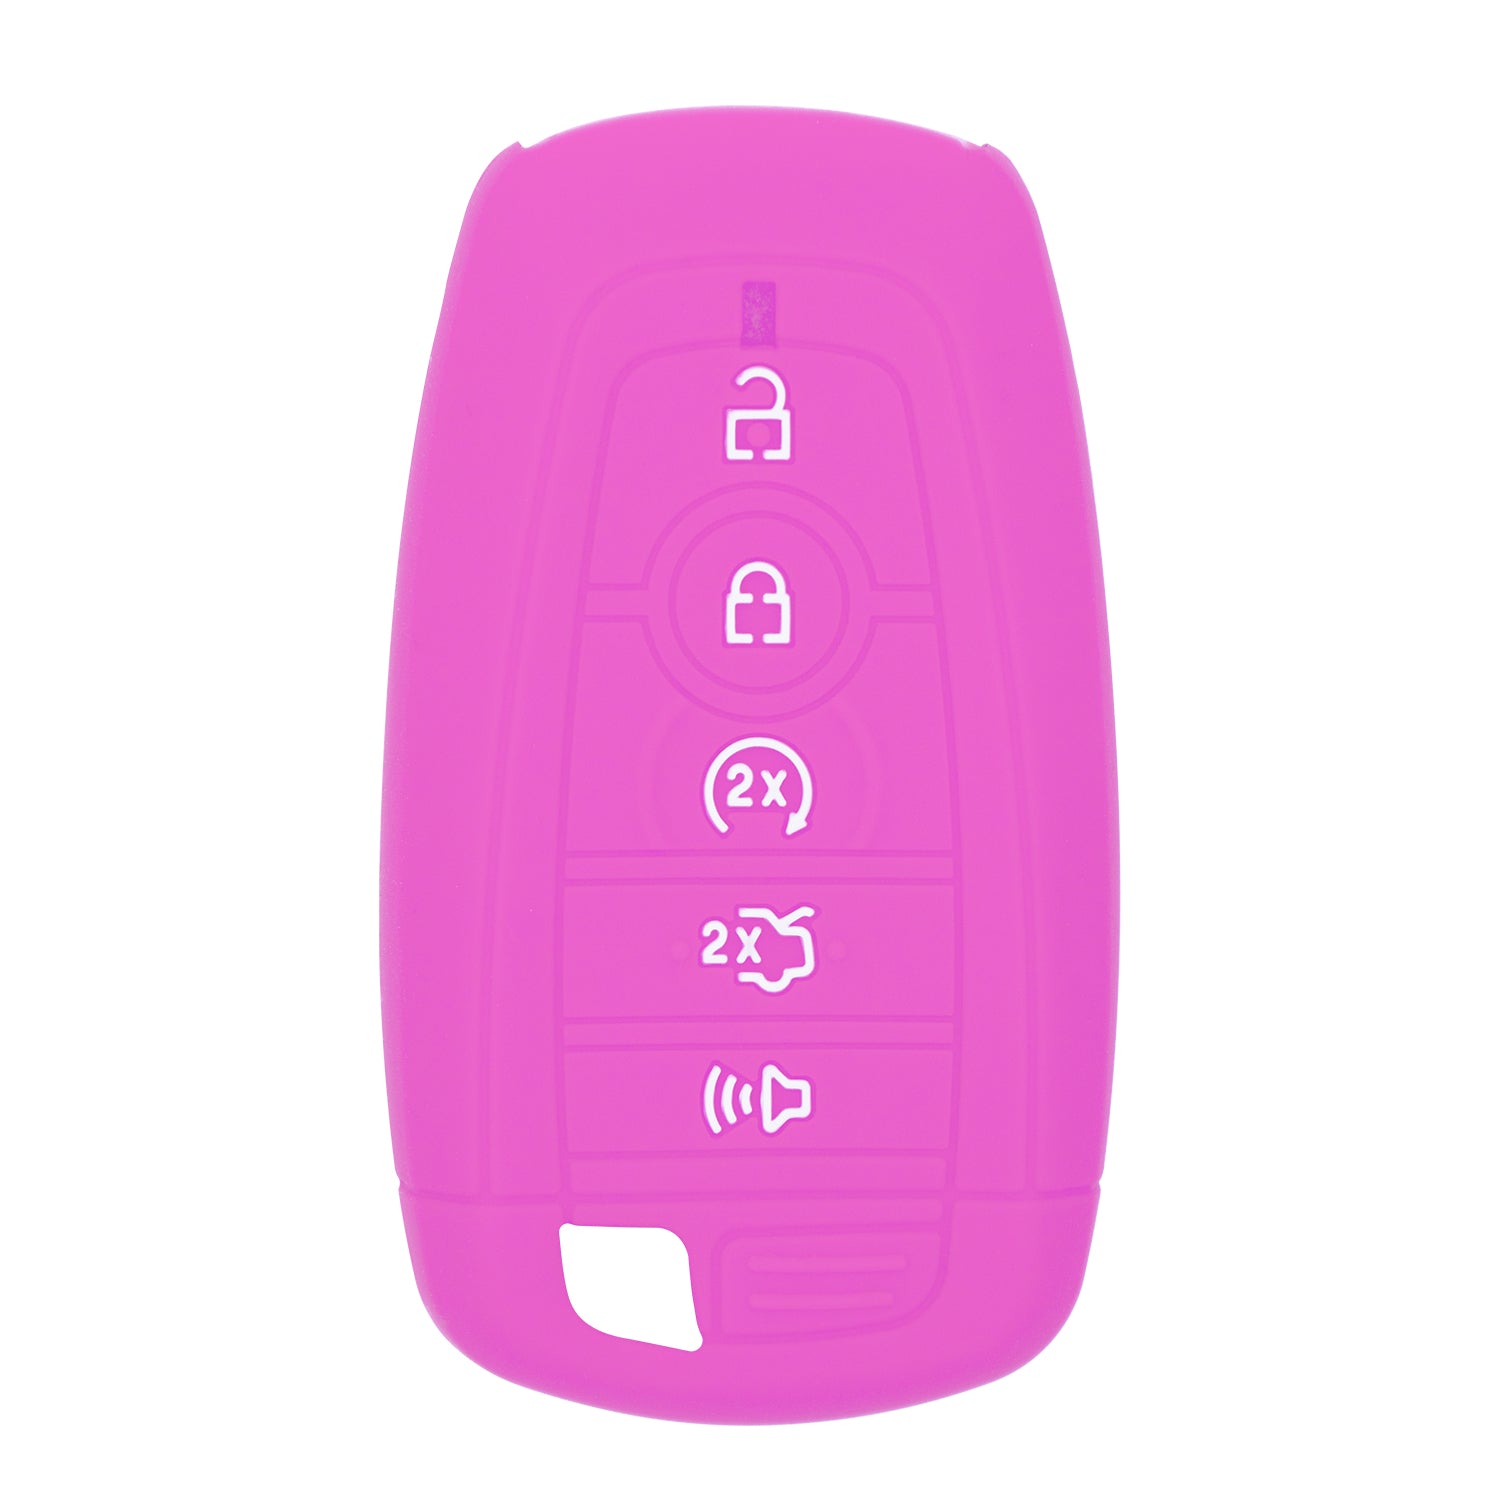 Silicone Case for Smart Key Remote Keyless Entry for Ford Fusion Explorer Edge Mustang Expedition M3N-A2C93142600 164-R8149 164R8149 R8149 (Purple)